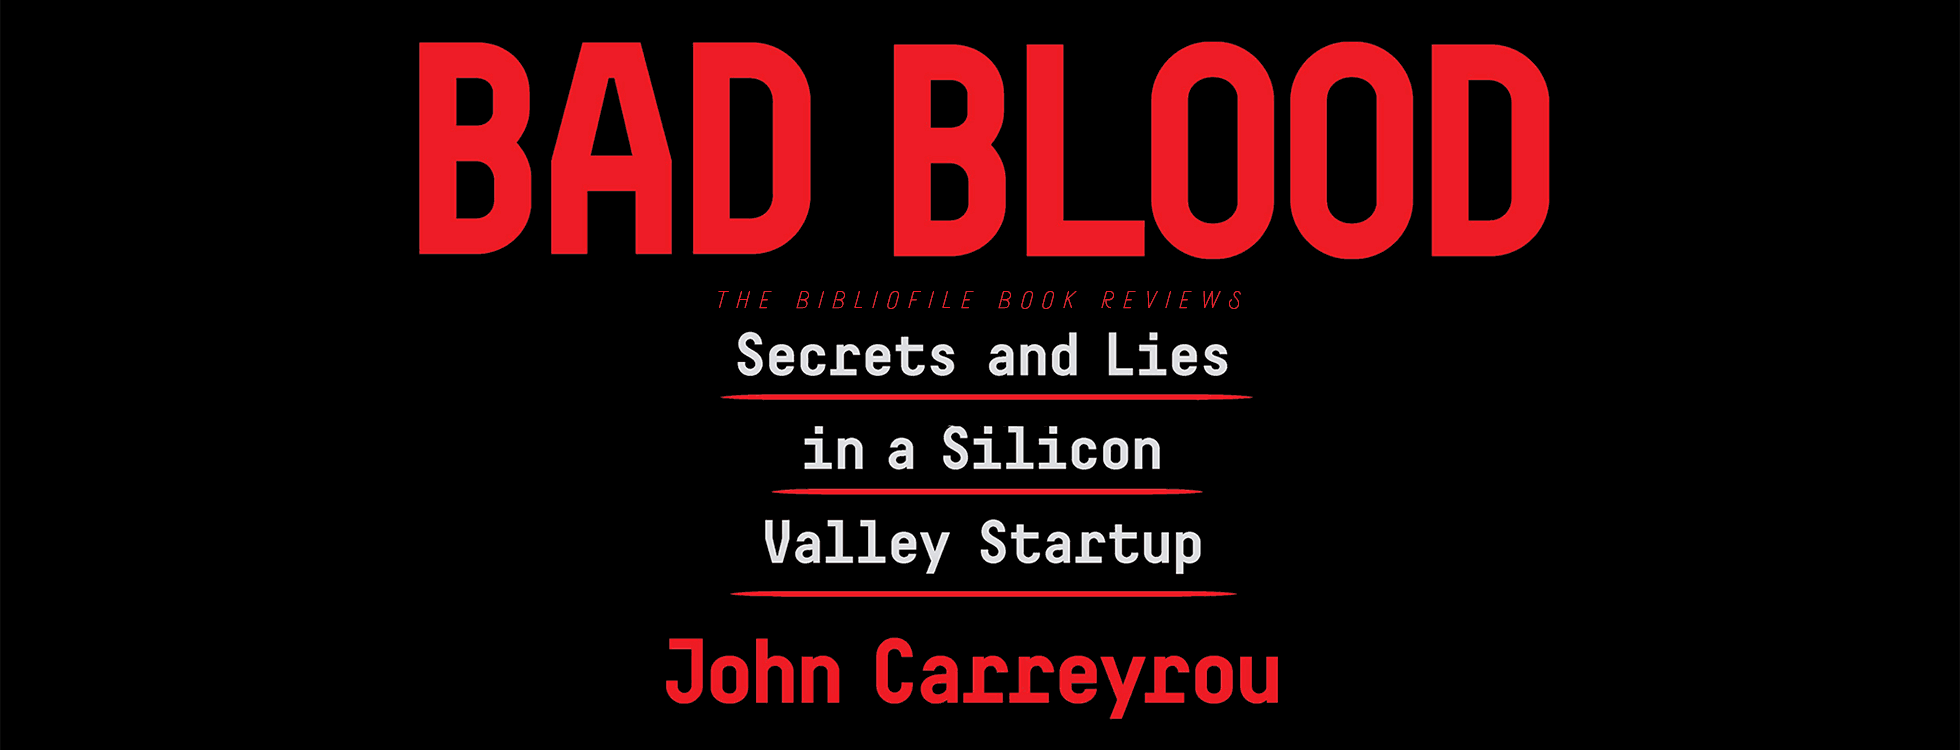 Theranos Bad Blood. "Bad Blood: the Secrets and Lies of a Silicon Valley Startup". BADBLOOD топ. Bad Blood meaning.